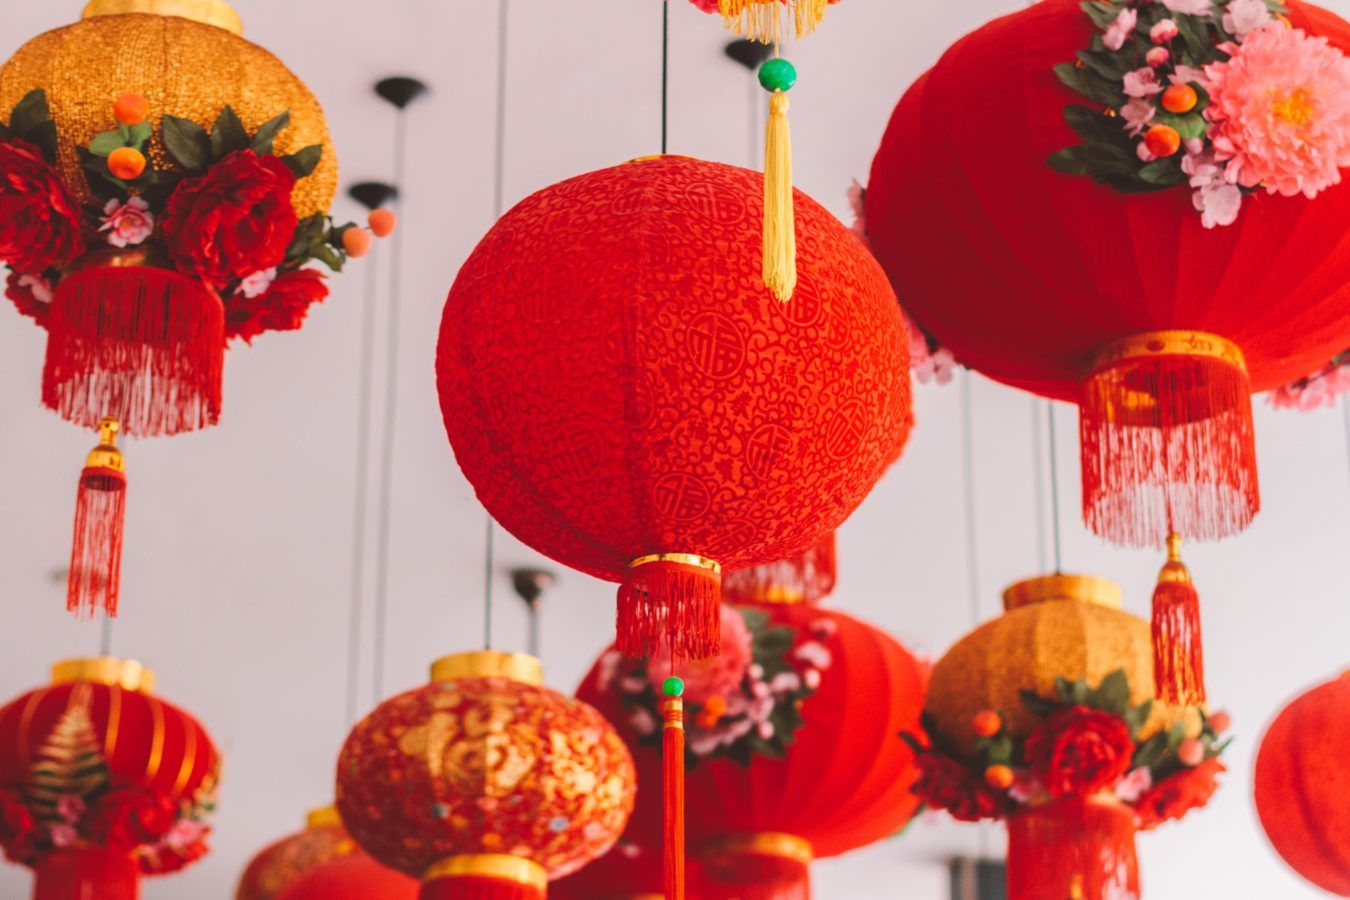 Chinese New Year 2022: Home decor ideas to bring in lucky vibes